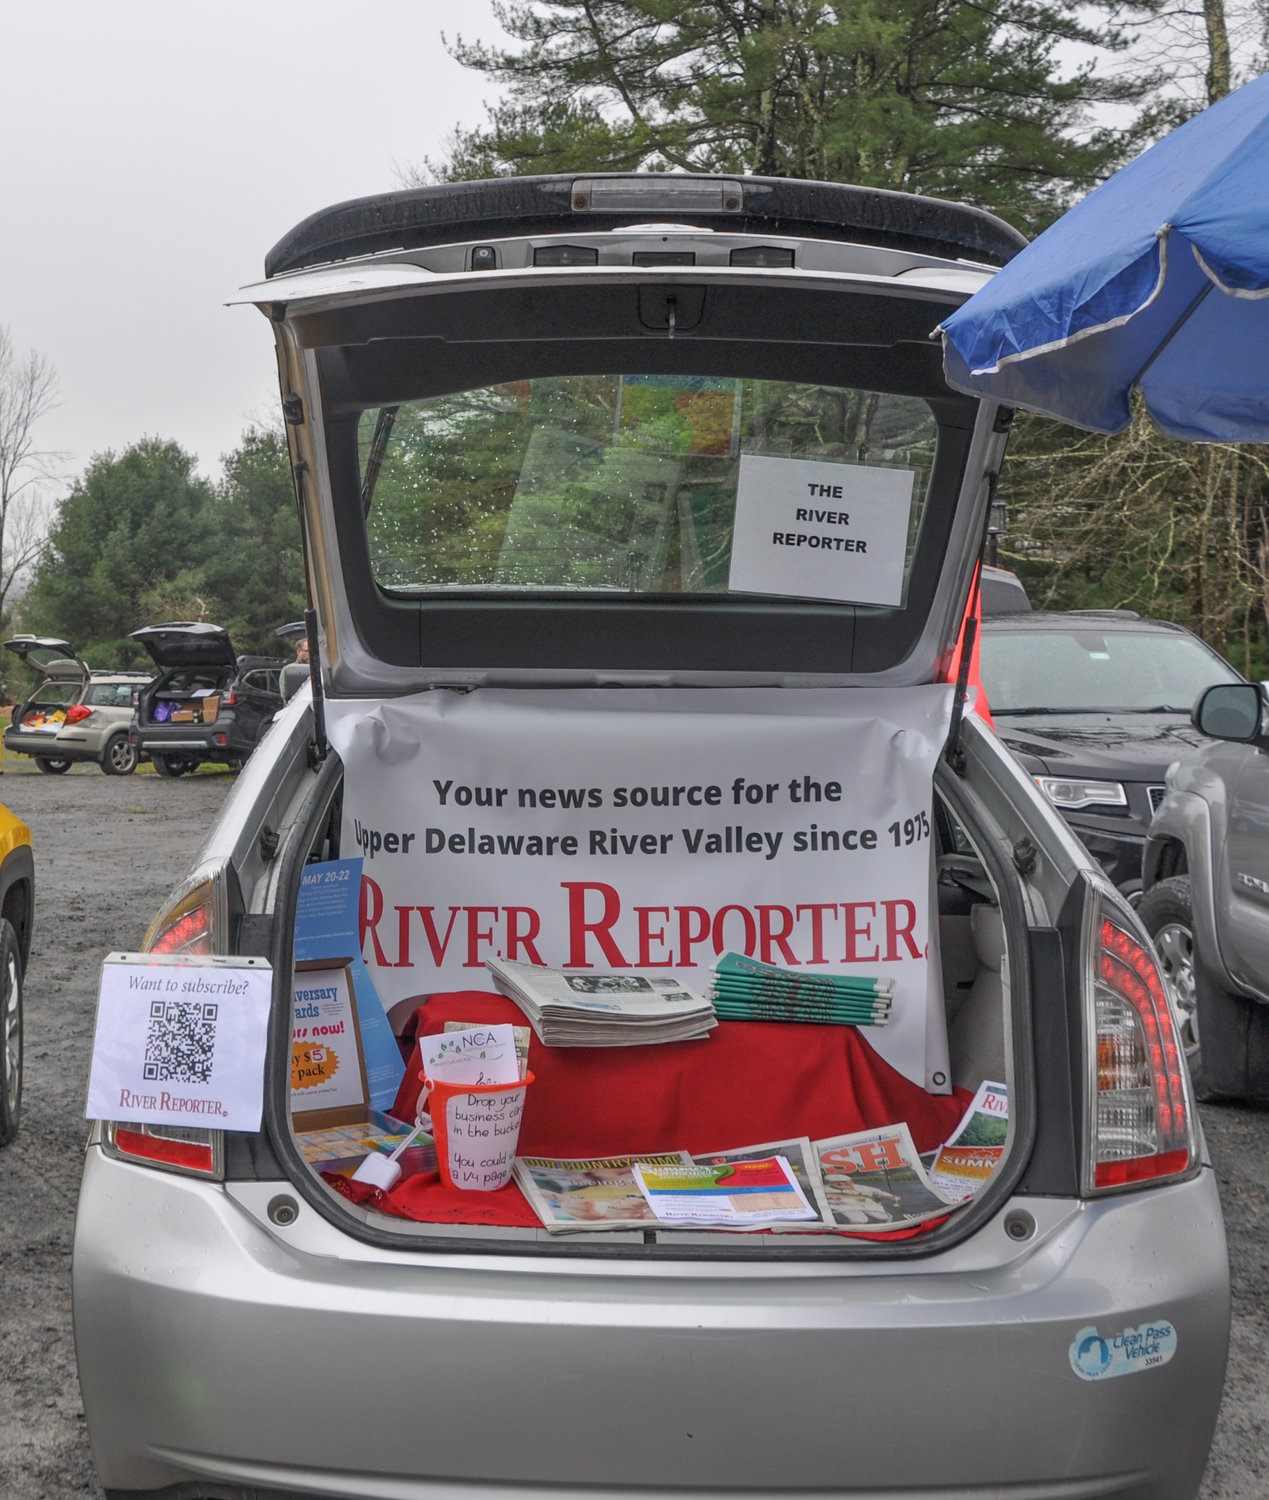 Naturally, The River Reporter-mobile was on hand at the SCVA business-to-business information exchange held last Wednesday in the Forestburgh Playhouse parking lot. The delicious food, provided by Mr. Willy's catering, was inside the Tavern—so that's where Dharma and I spent most of our time.